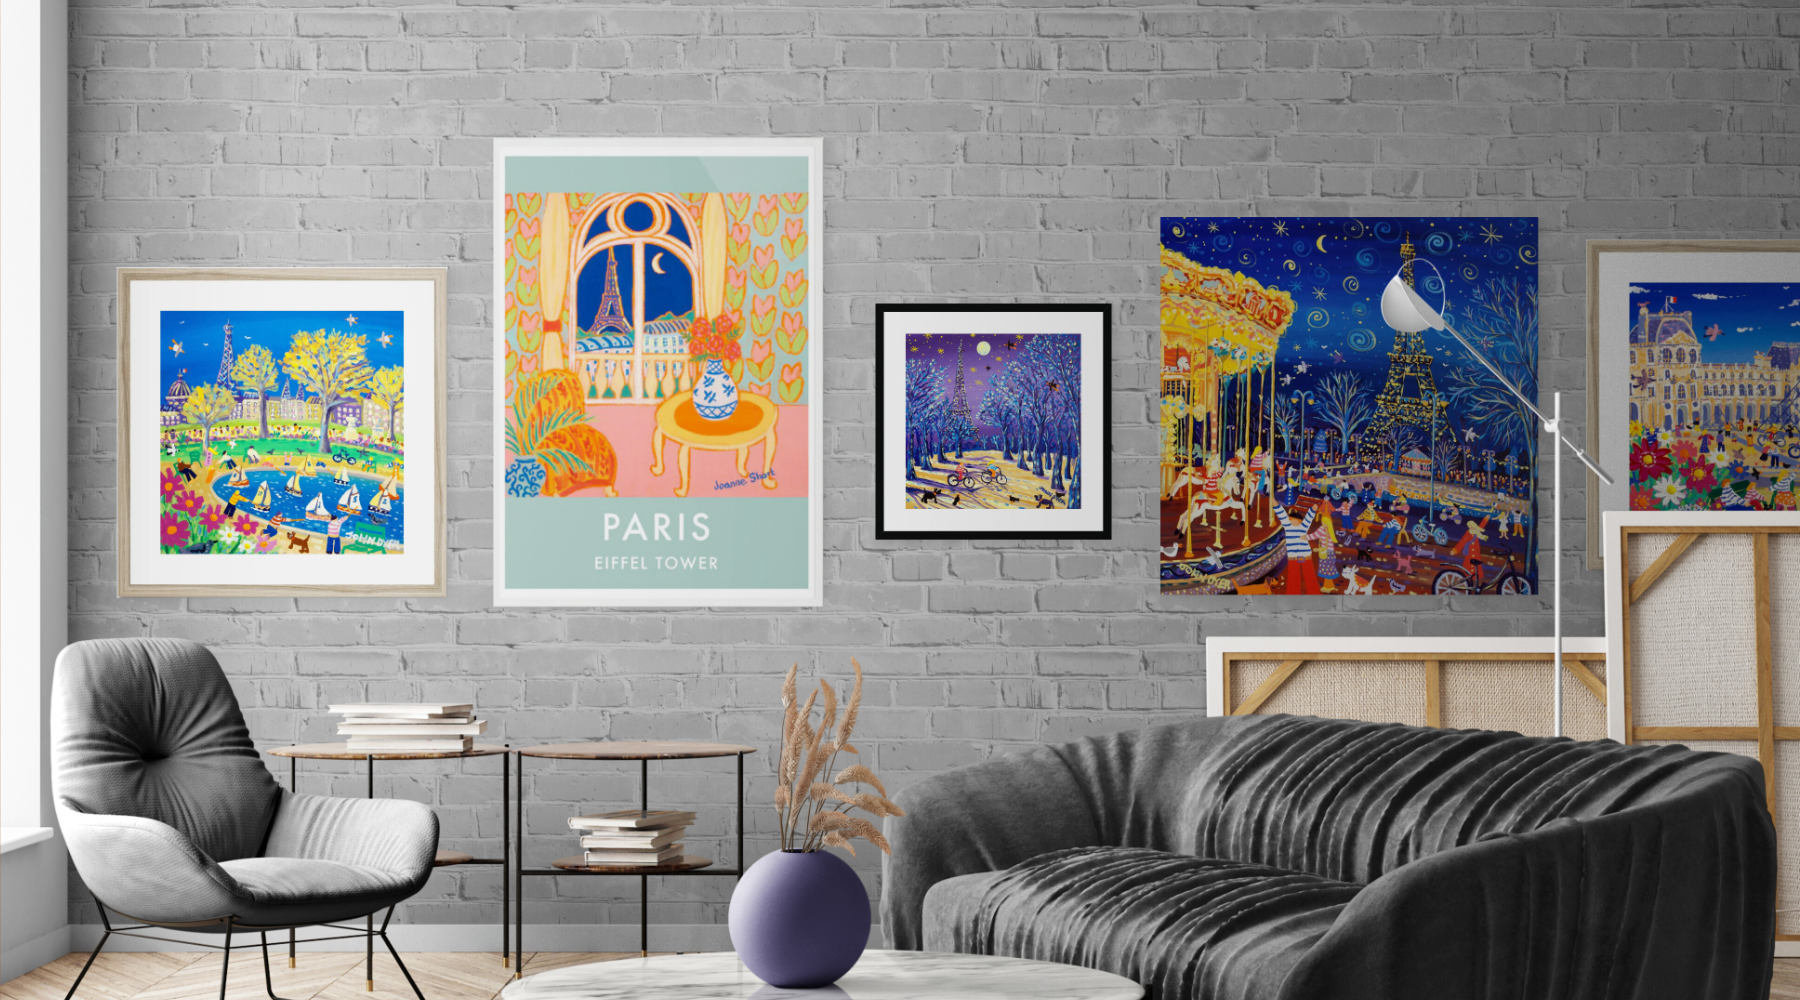 Art prints of Paris displayed in a contemporary interior